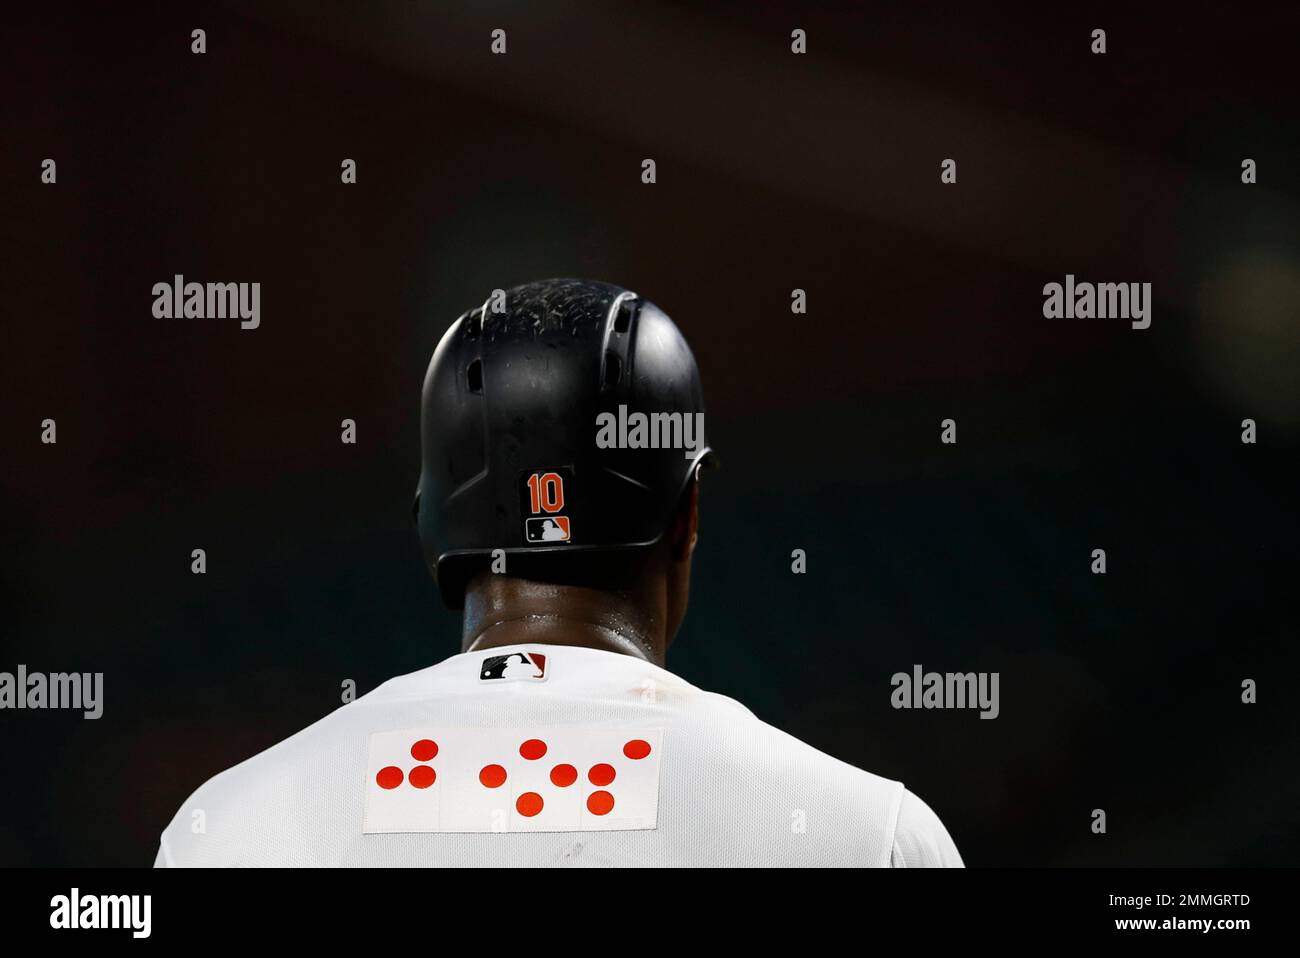 Baltimore Orioles first baseman Trey Mancini wears a jersey that features  Orioles in Braille during a baseball game against the Toronto Blue Jays,  Tuesday, Sept. 18, 2018, in Baltimore. (AP Photo/Patrick Semansky